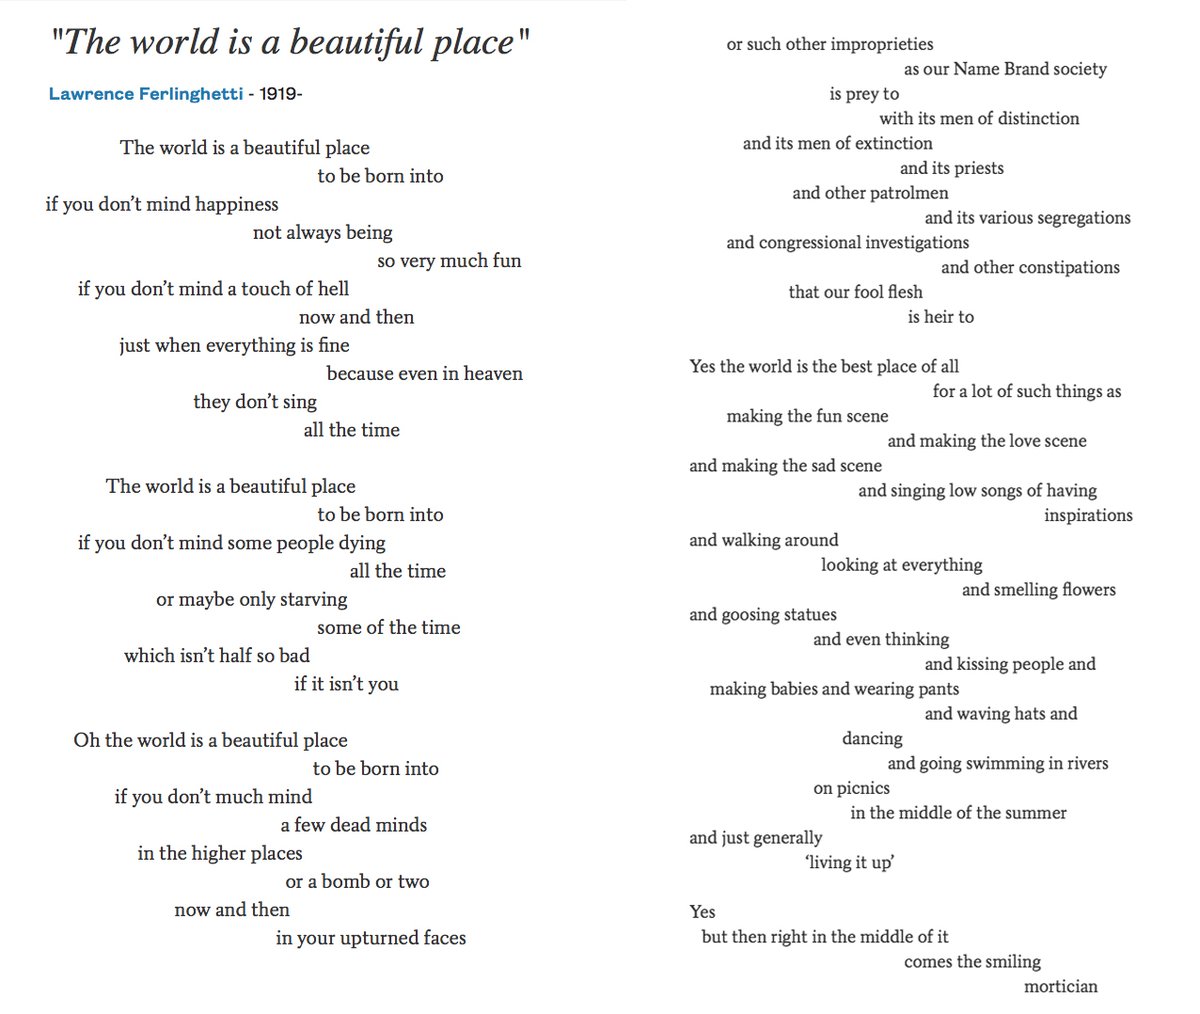 20 The World Is A Beautiful Place by Lawrence Ferlinghetti For Ferlinghetti's 101st birthday  #ferlinghetti101  #PandemicPoems  https://soundcloud.com/user-115260978/20-the-world-is-a-beautiful-place-by-lawrence-ferlinghetti